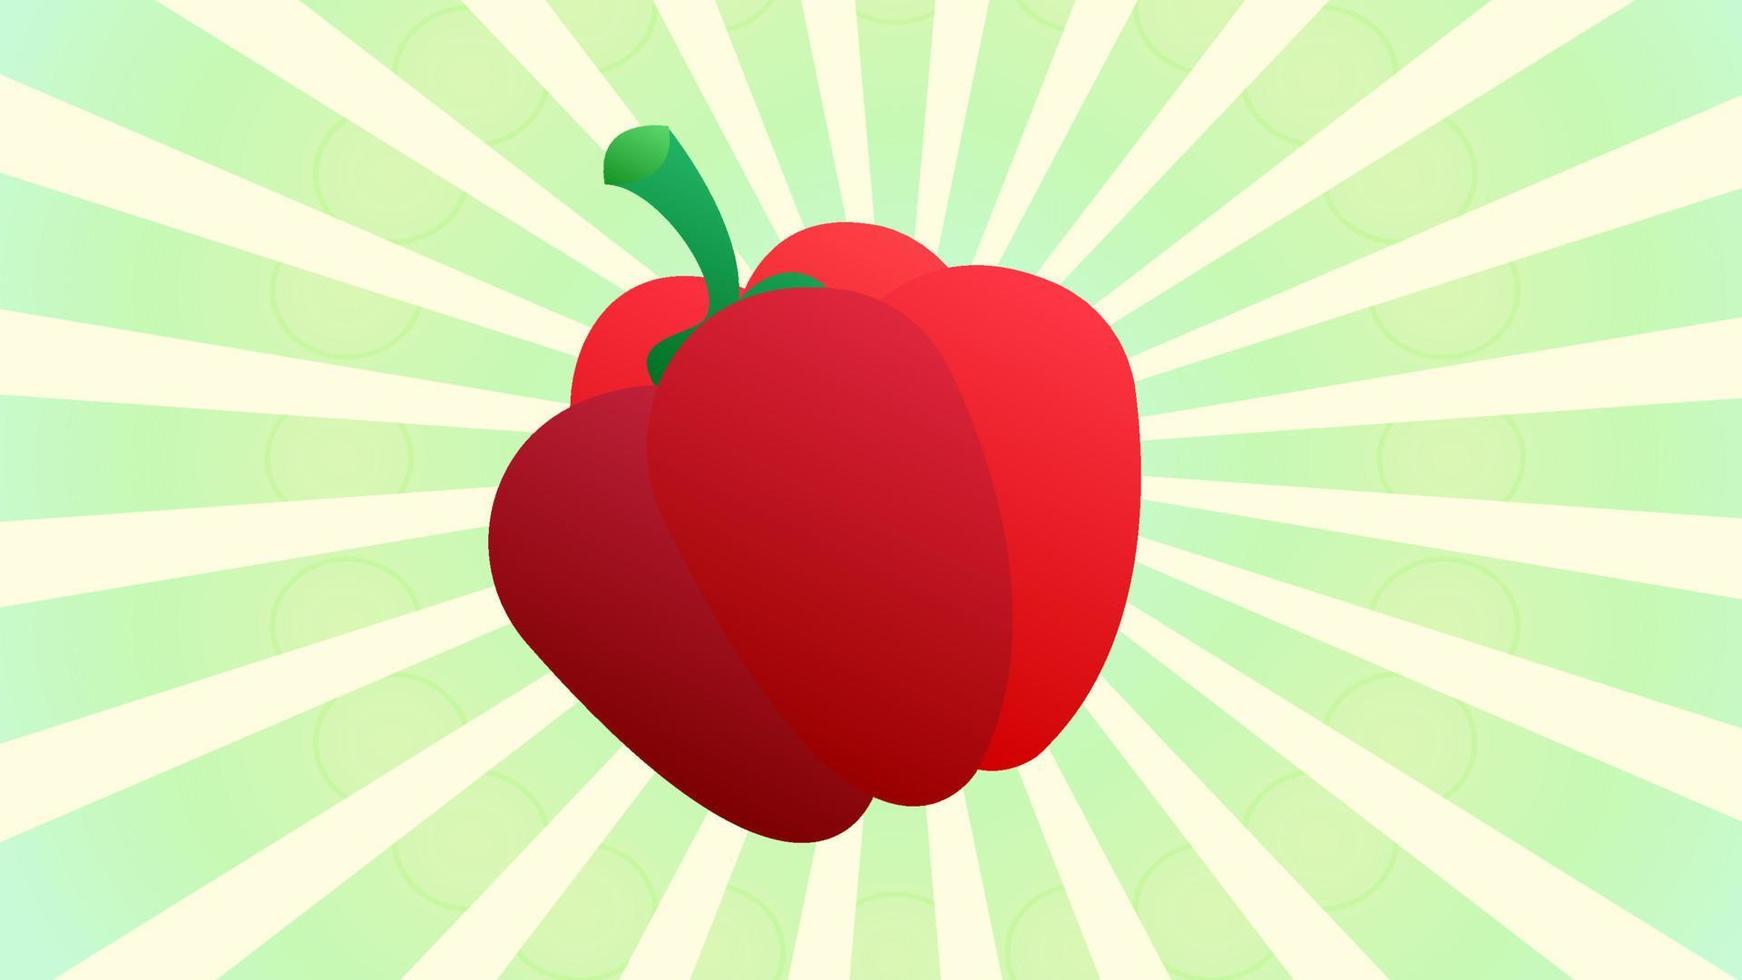 Sweet pepper. Hand drawn vector illustration with sweet pepper and divergent rays. Used for poster, banner, web, t-shirt print, bag print, badges, flyer, logo design and more